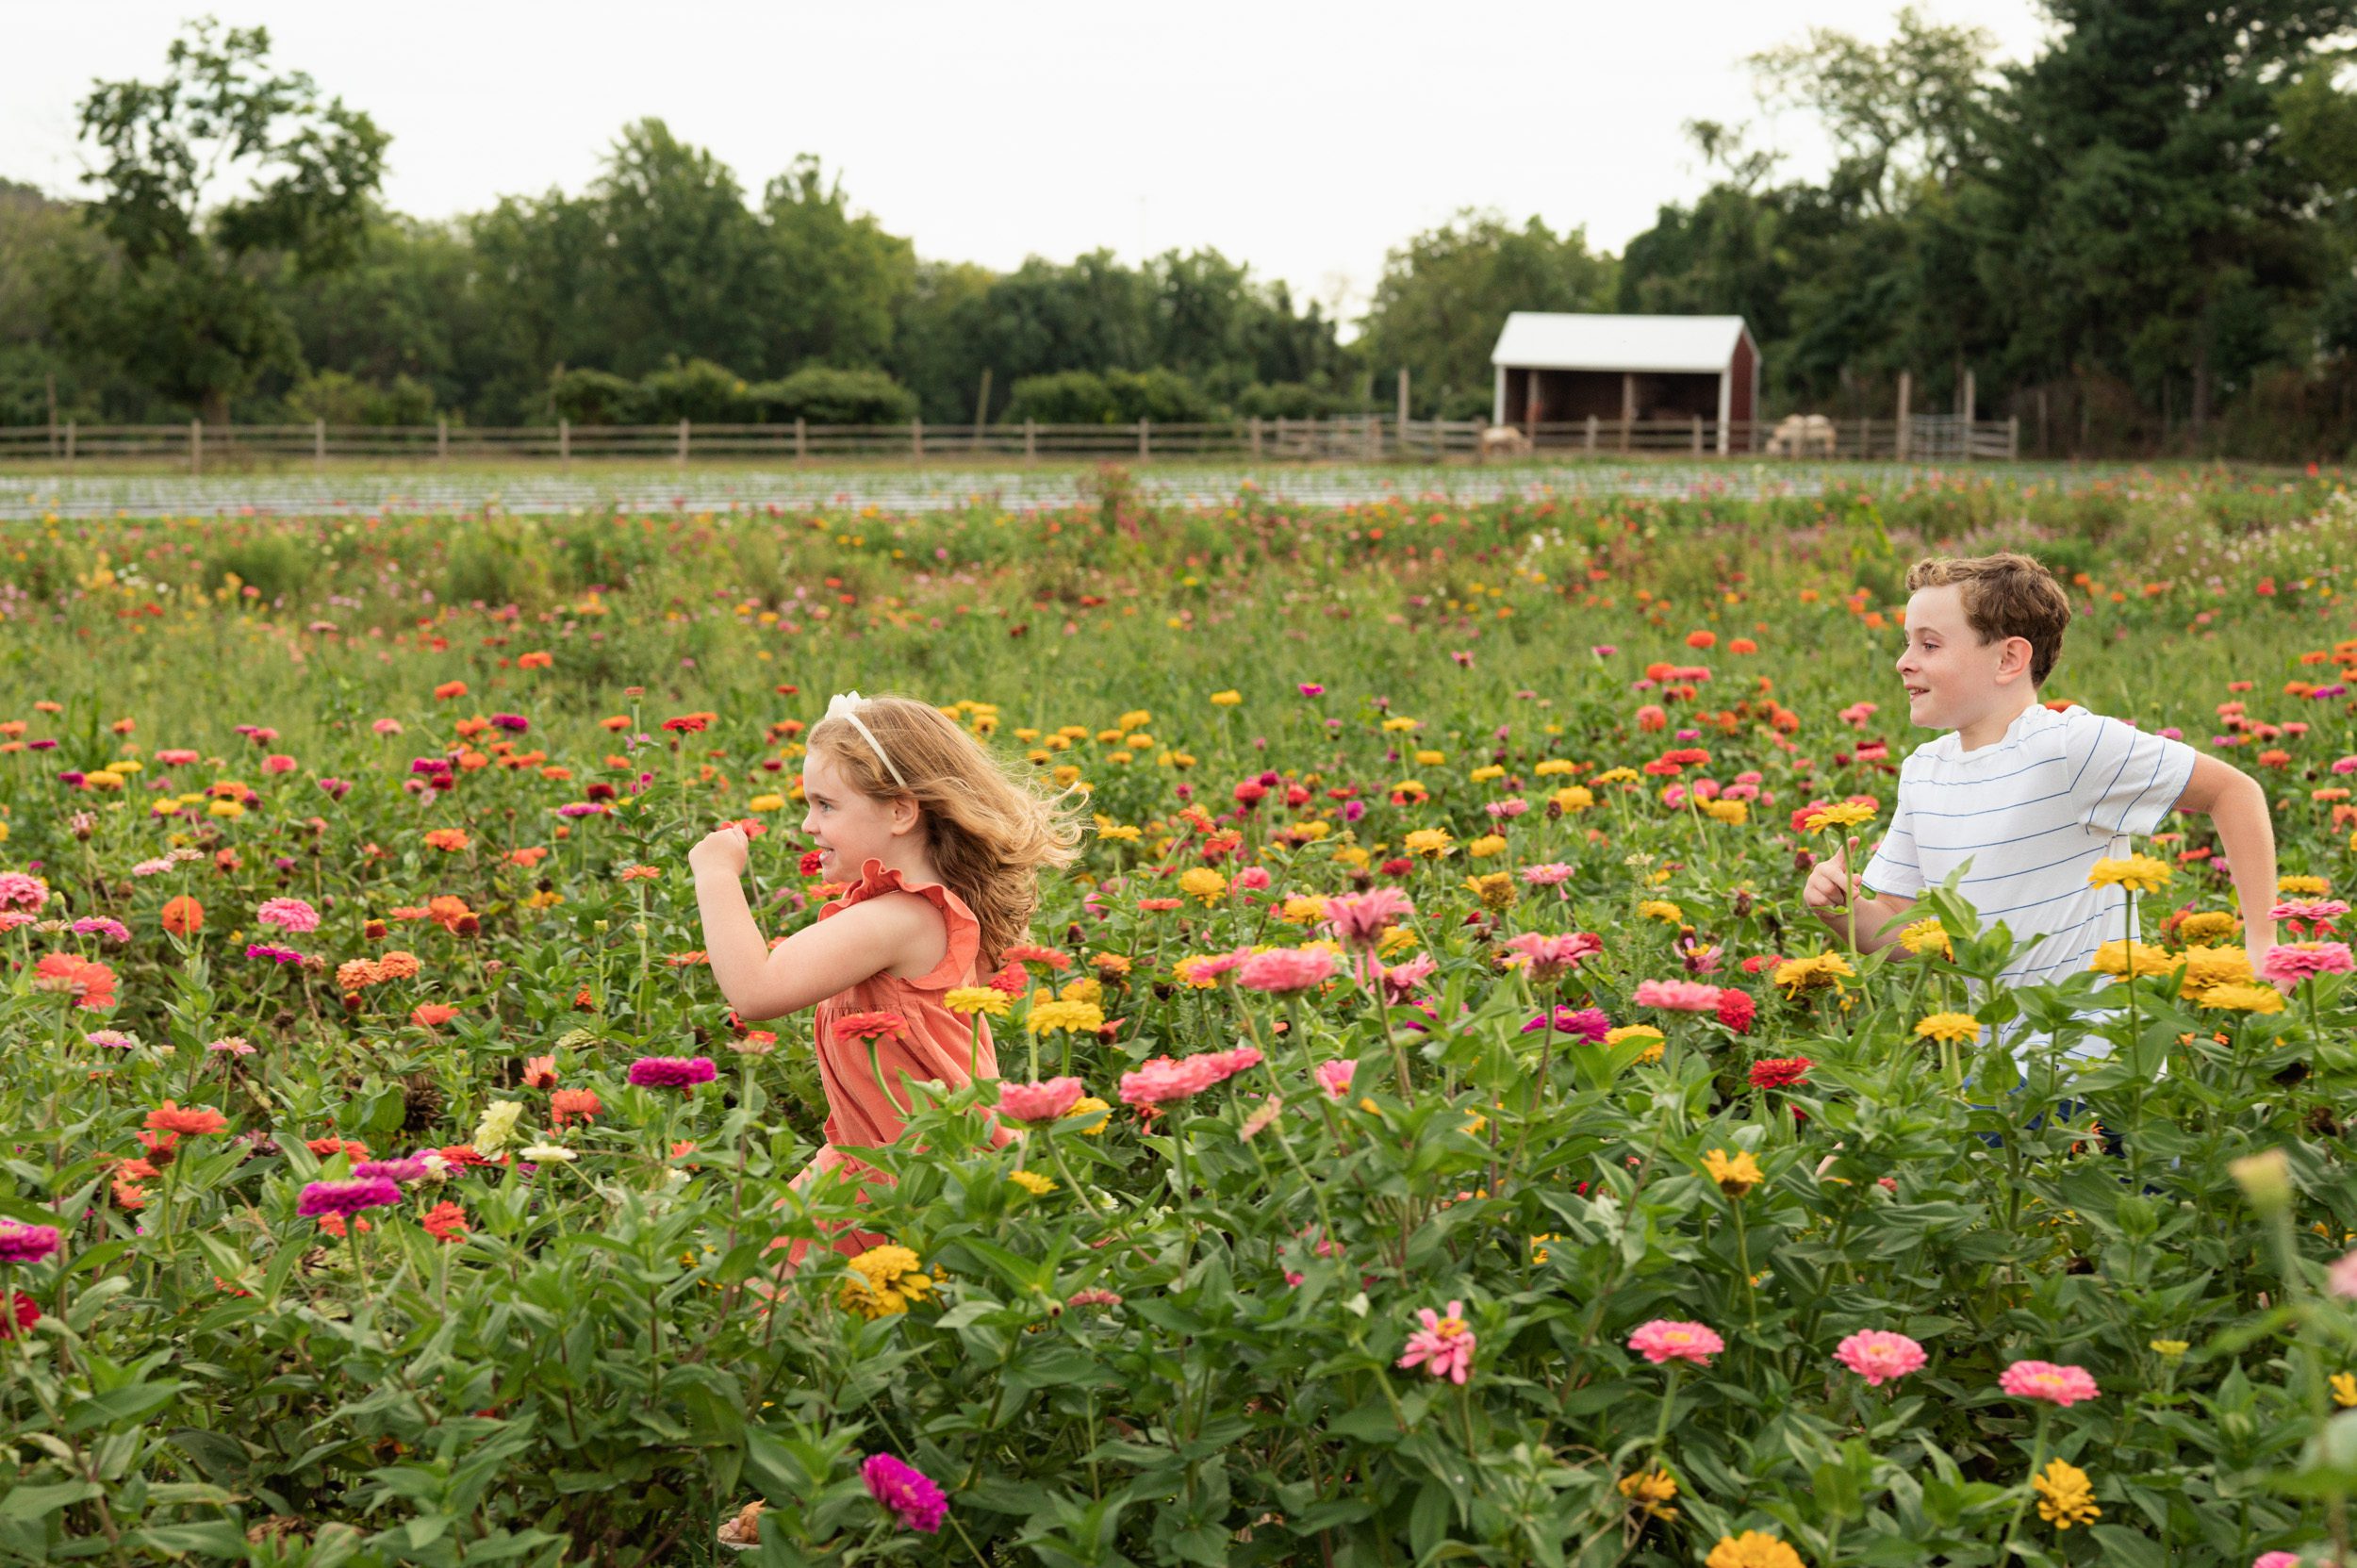 a young girl running through a field of spring and summer flowers as her older brother chases her and they both laugh